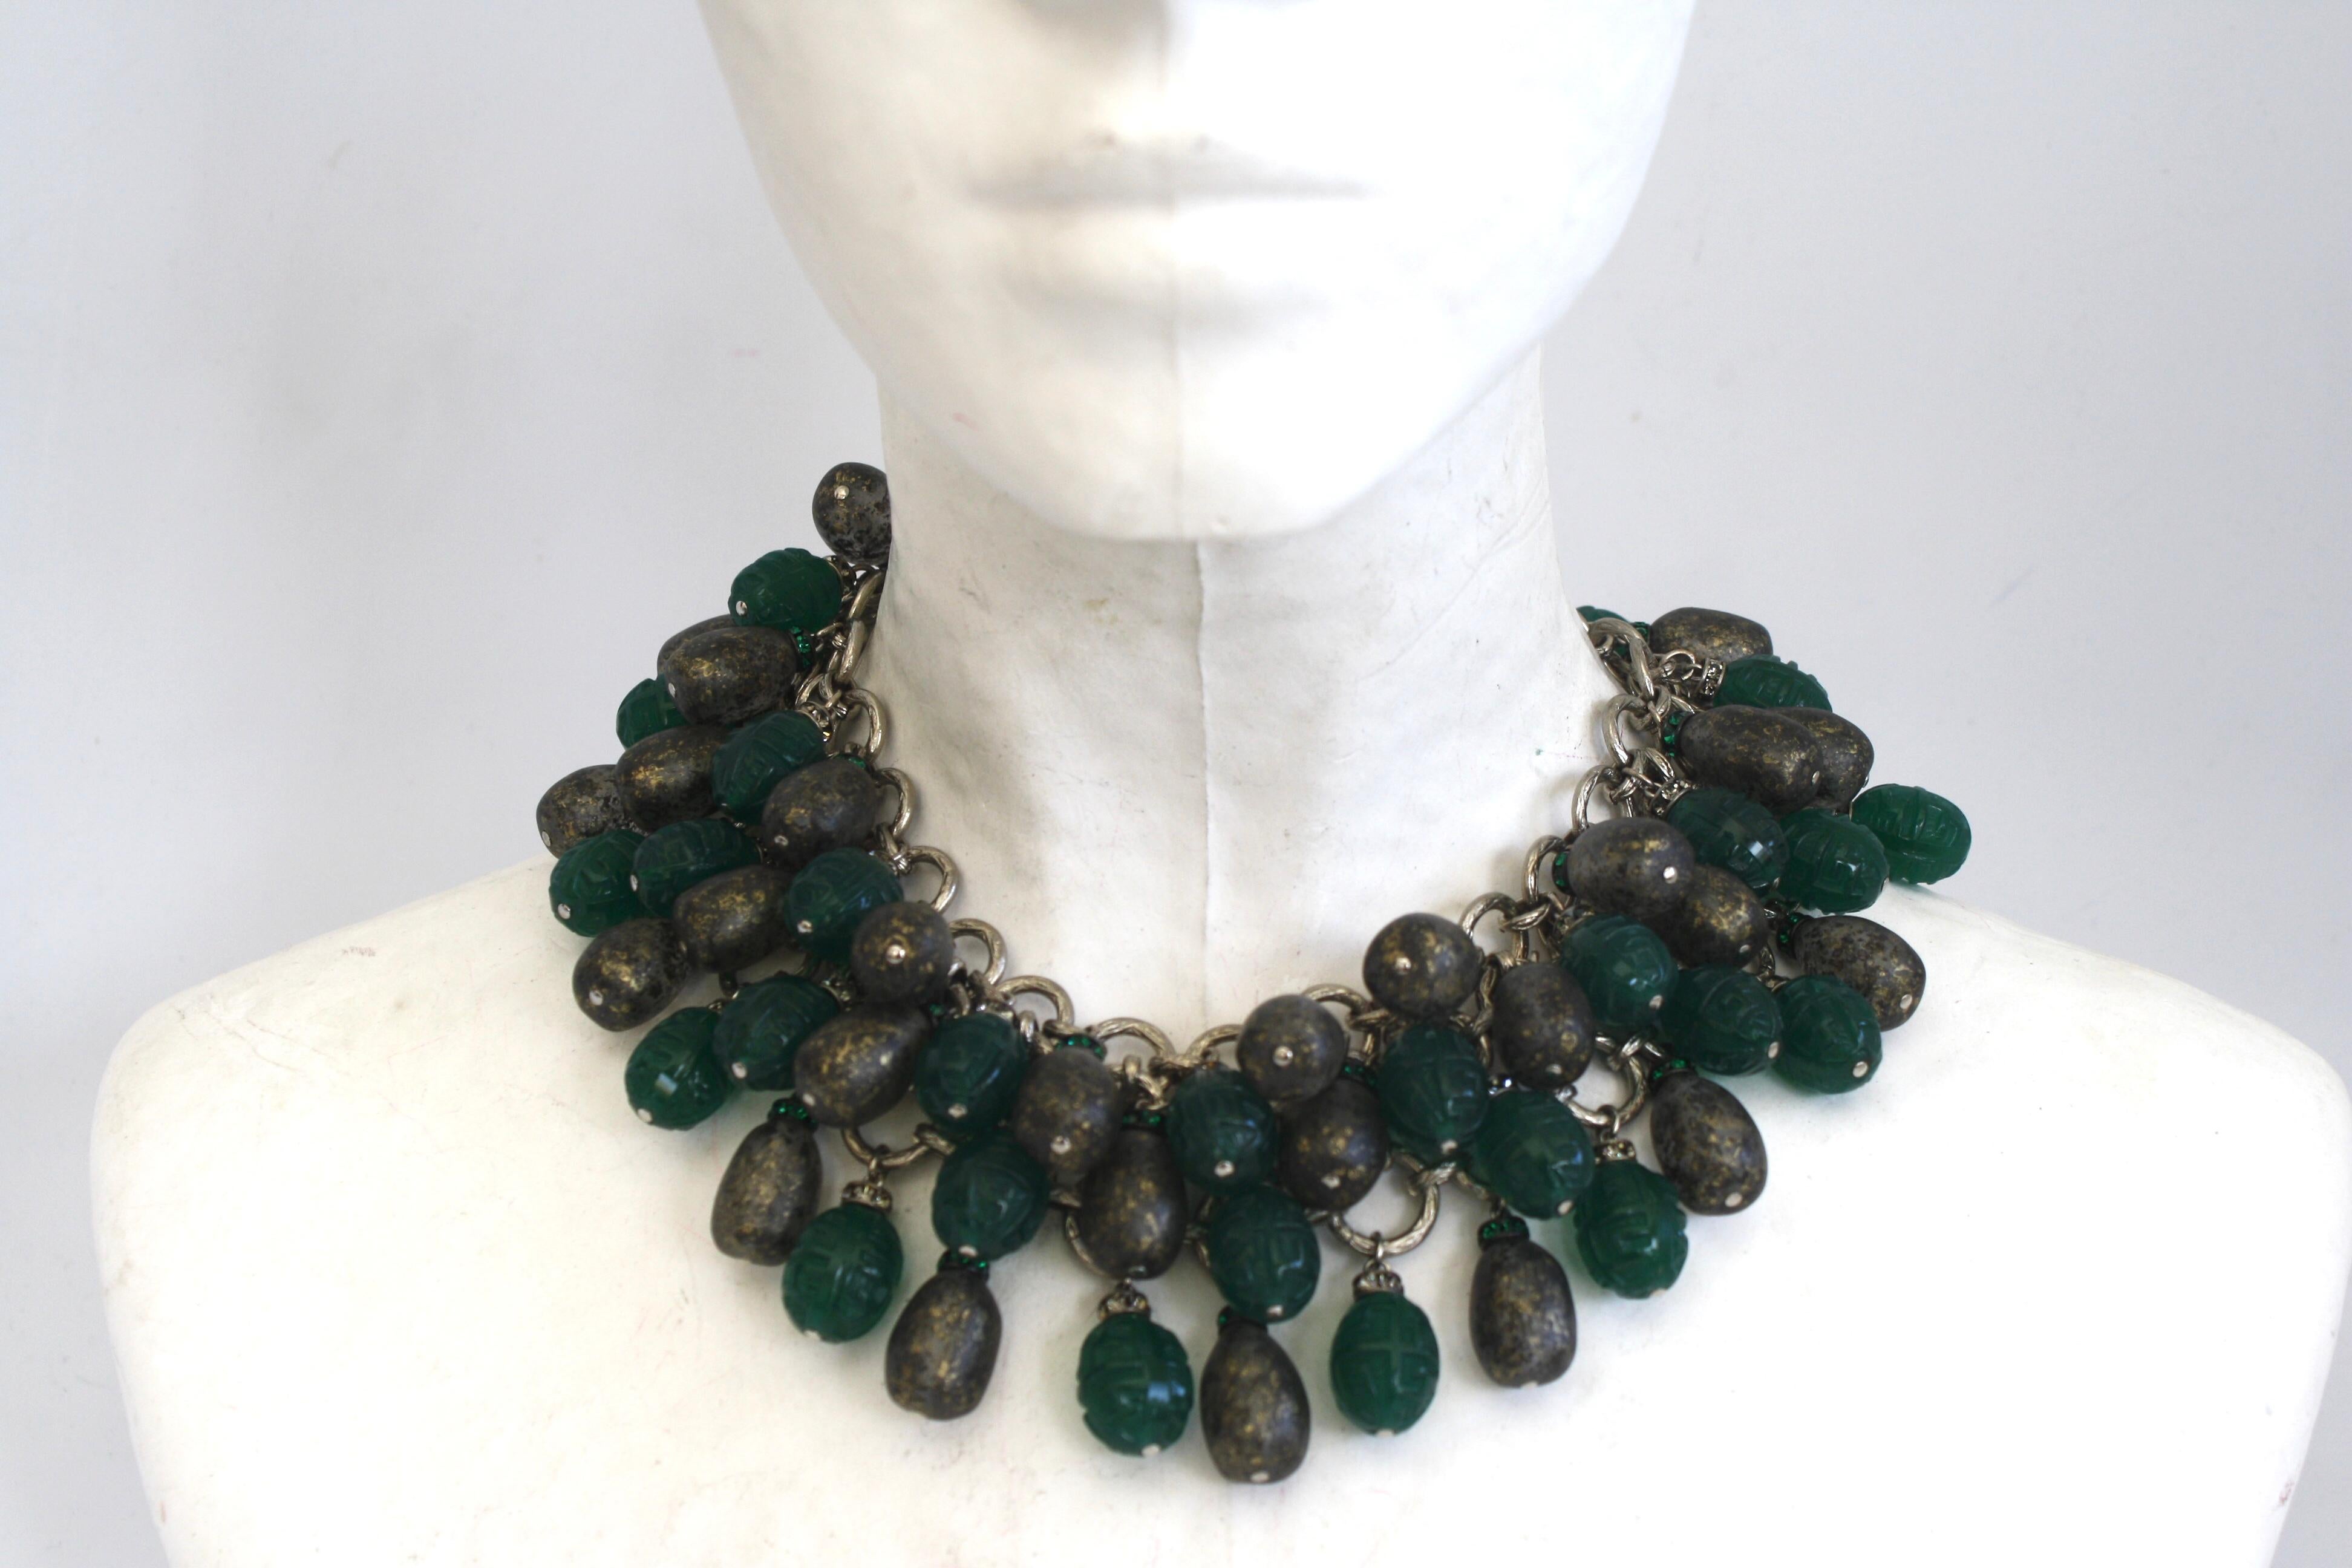 Multi layer glass cabochons come together on dark rhodium to make this gorgeous statement piece from Francoise Montague. 